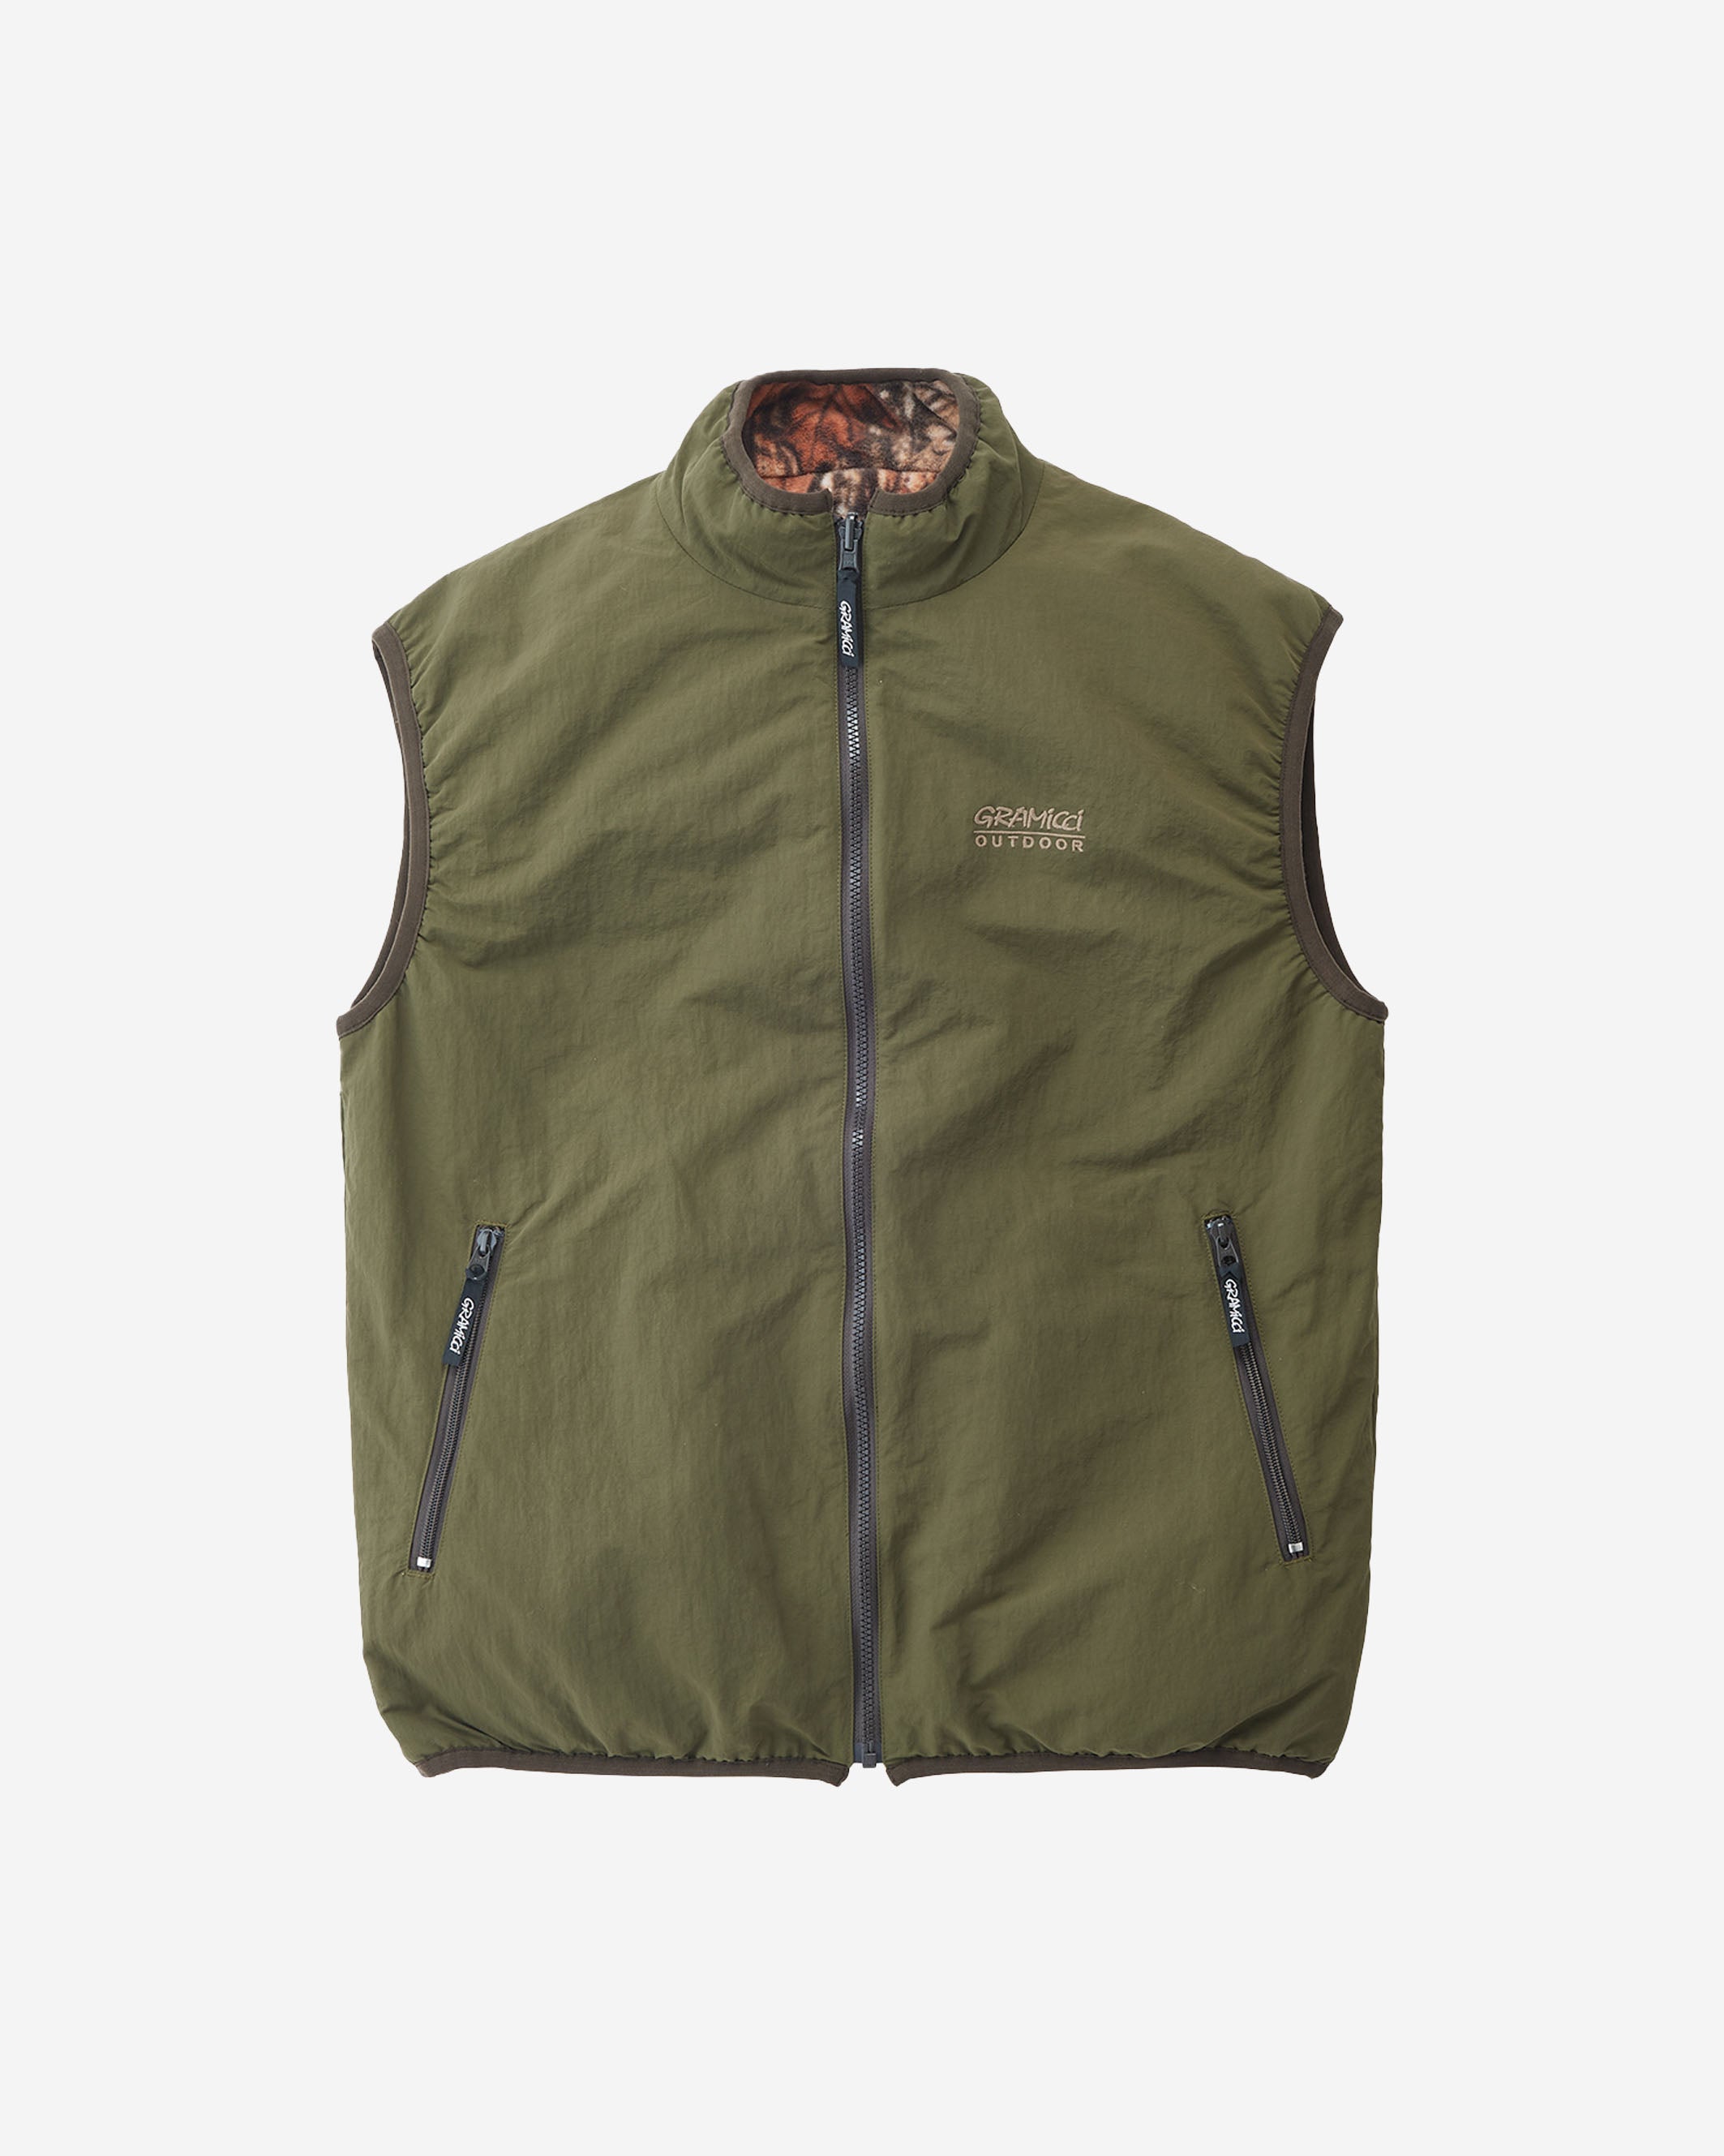 The Reversible Fleece Vest boasts exceptional functionality, as it is a durable, wrinkle-resistant vest. This versatile vest utilizes water-repellent nylon and puffy, extra-long-fleece. The spacious silhouette allows this reversible vest to be worn as an excellent outerwear as well as a mid-layer.